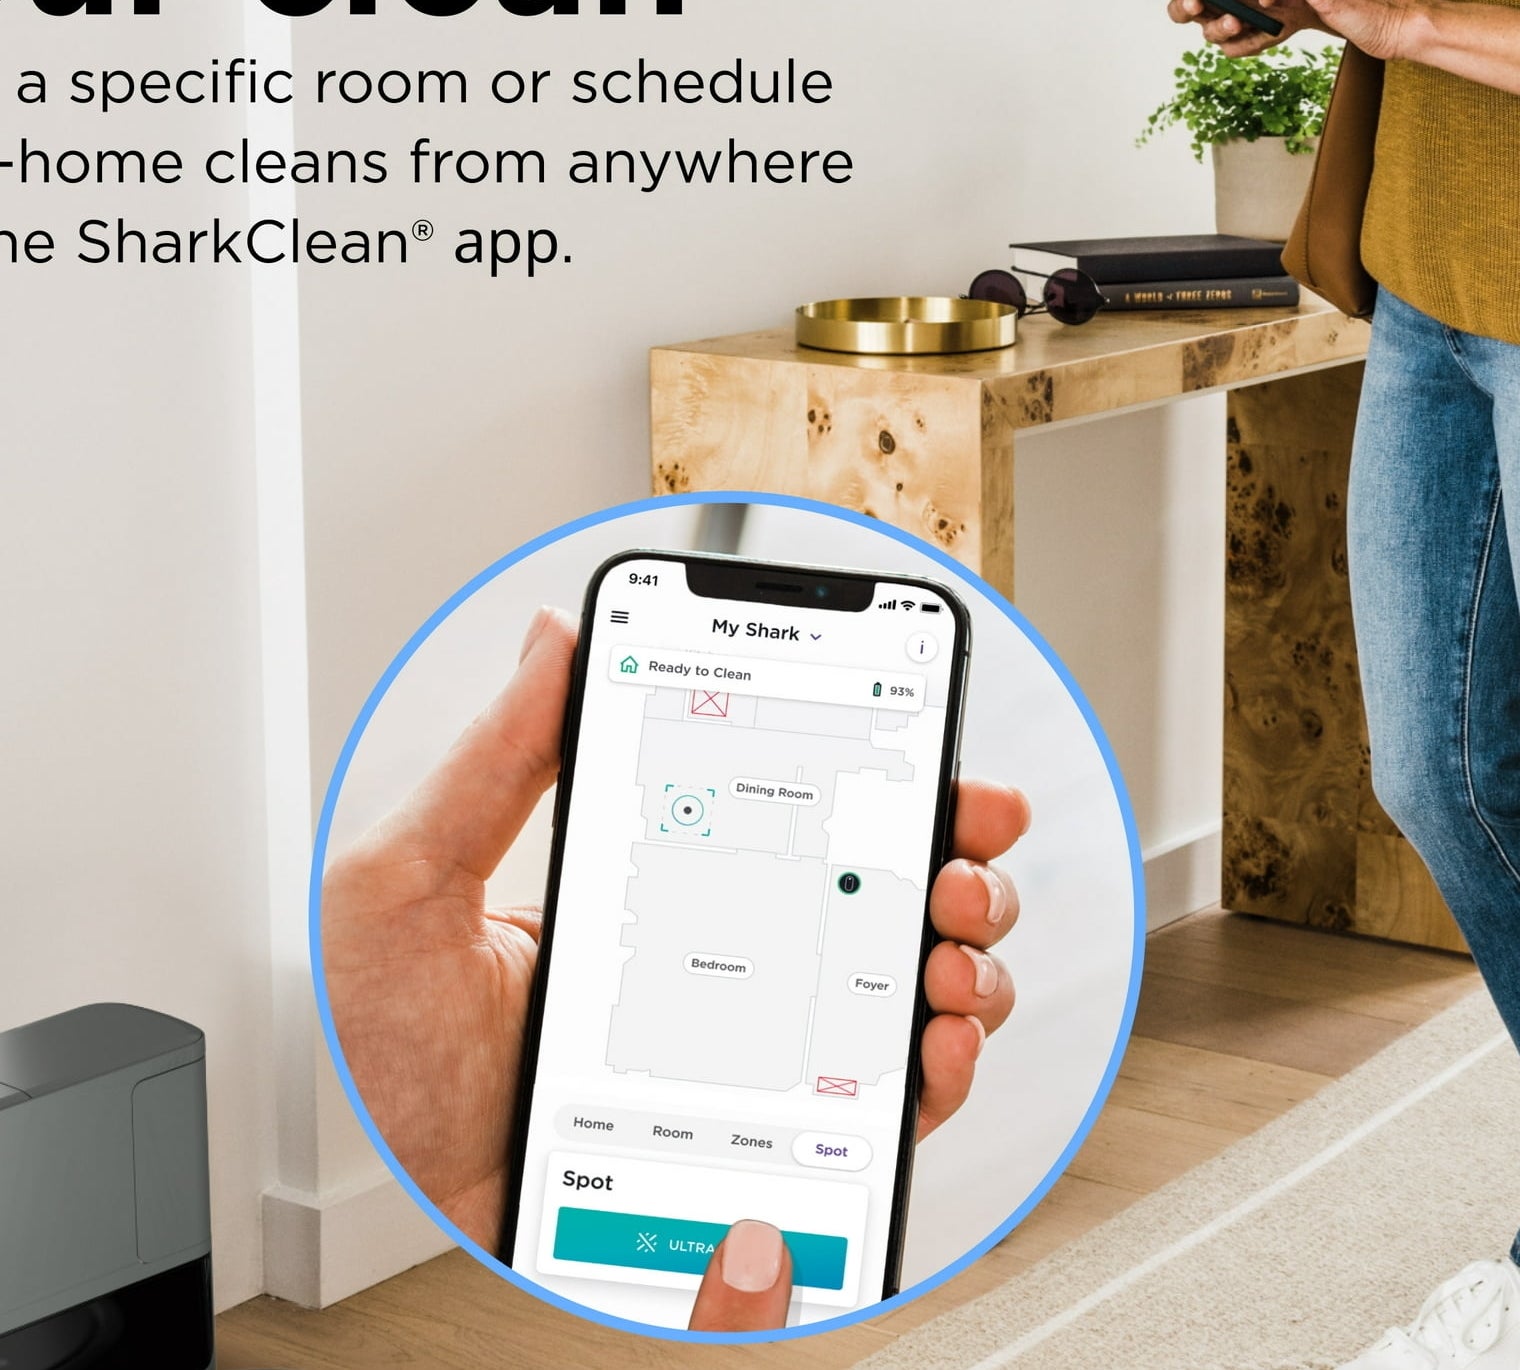 A person using the SharkClean® app on their phone to control a Shark robot vacuum. The app allows room-specific or whole-home cleaning schedules